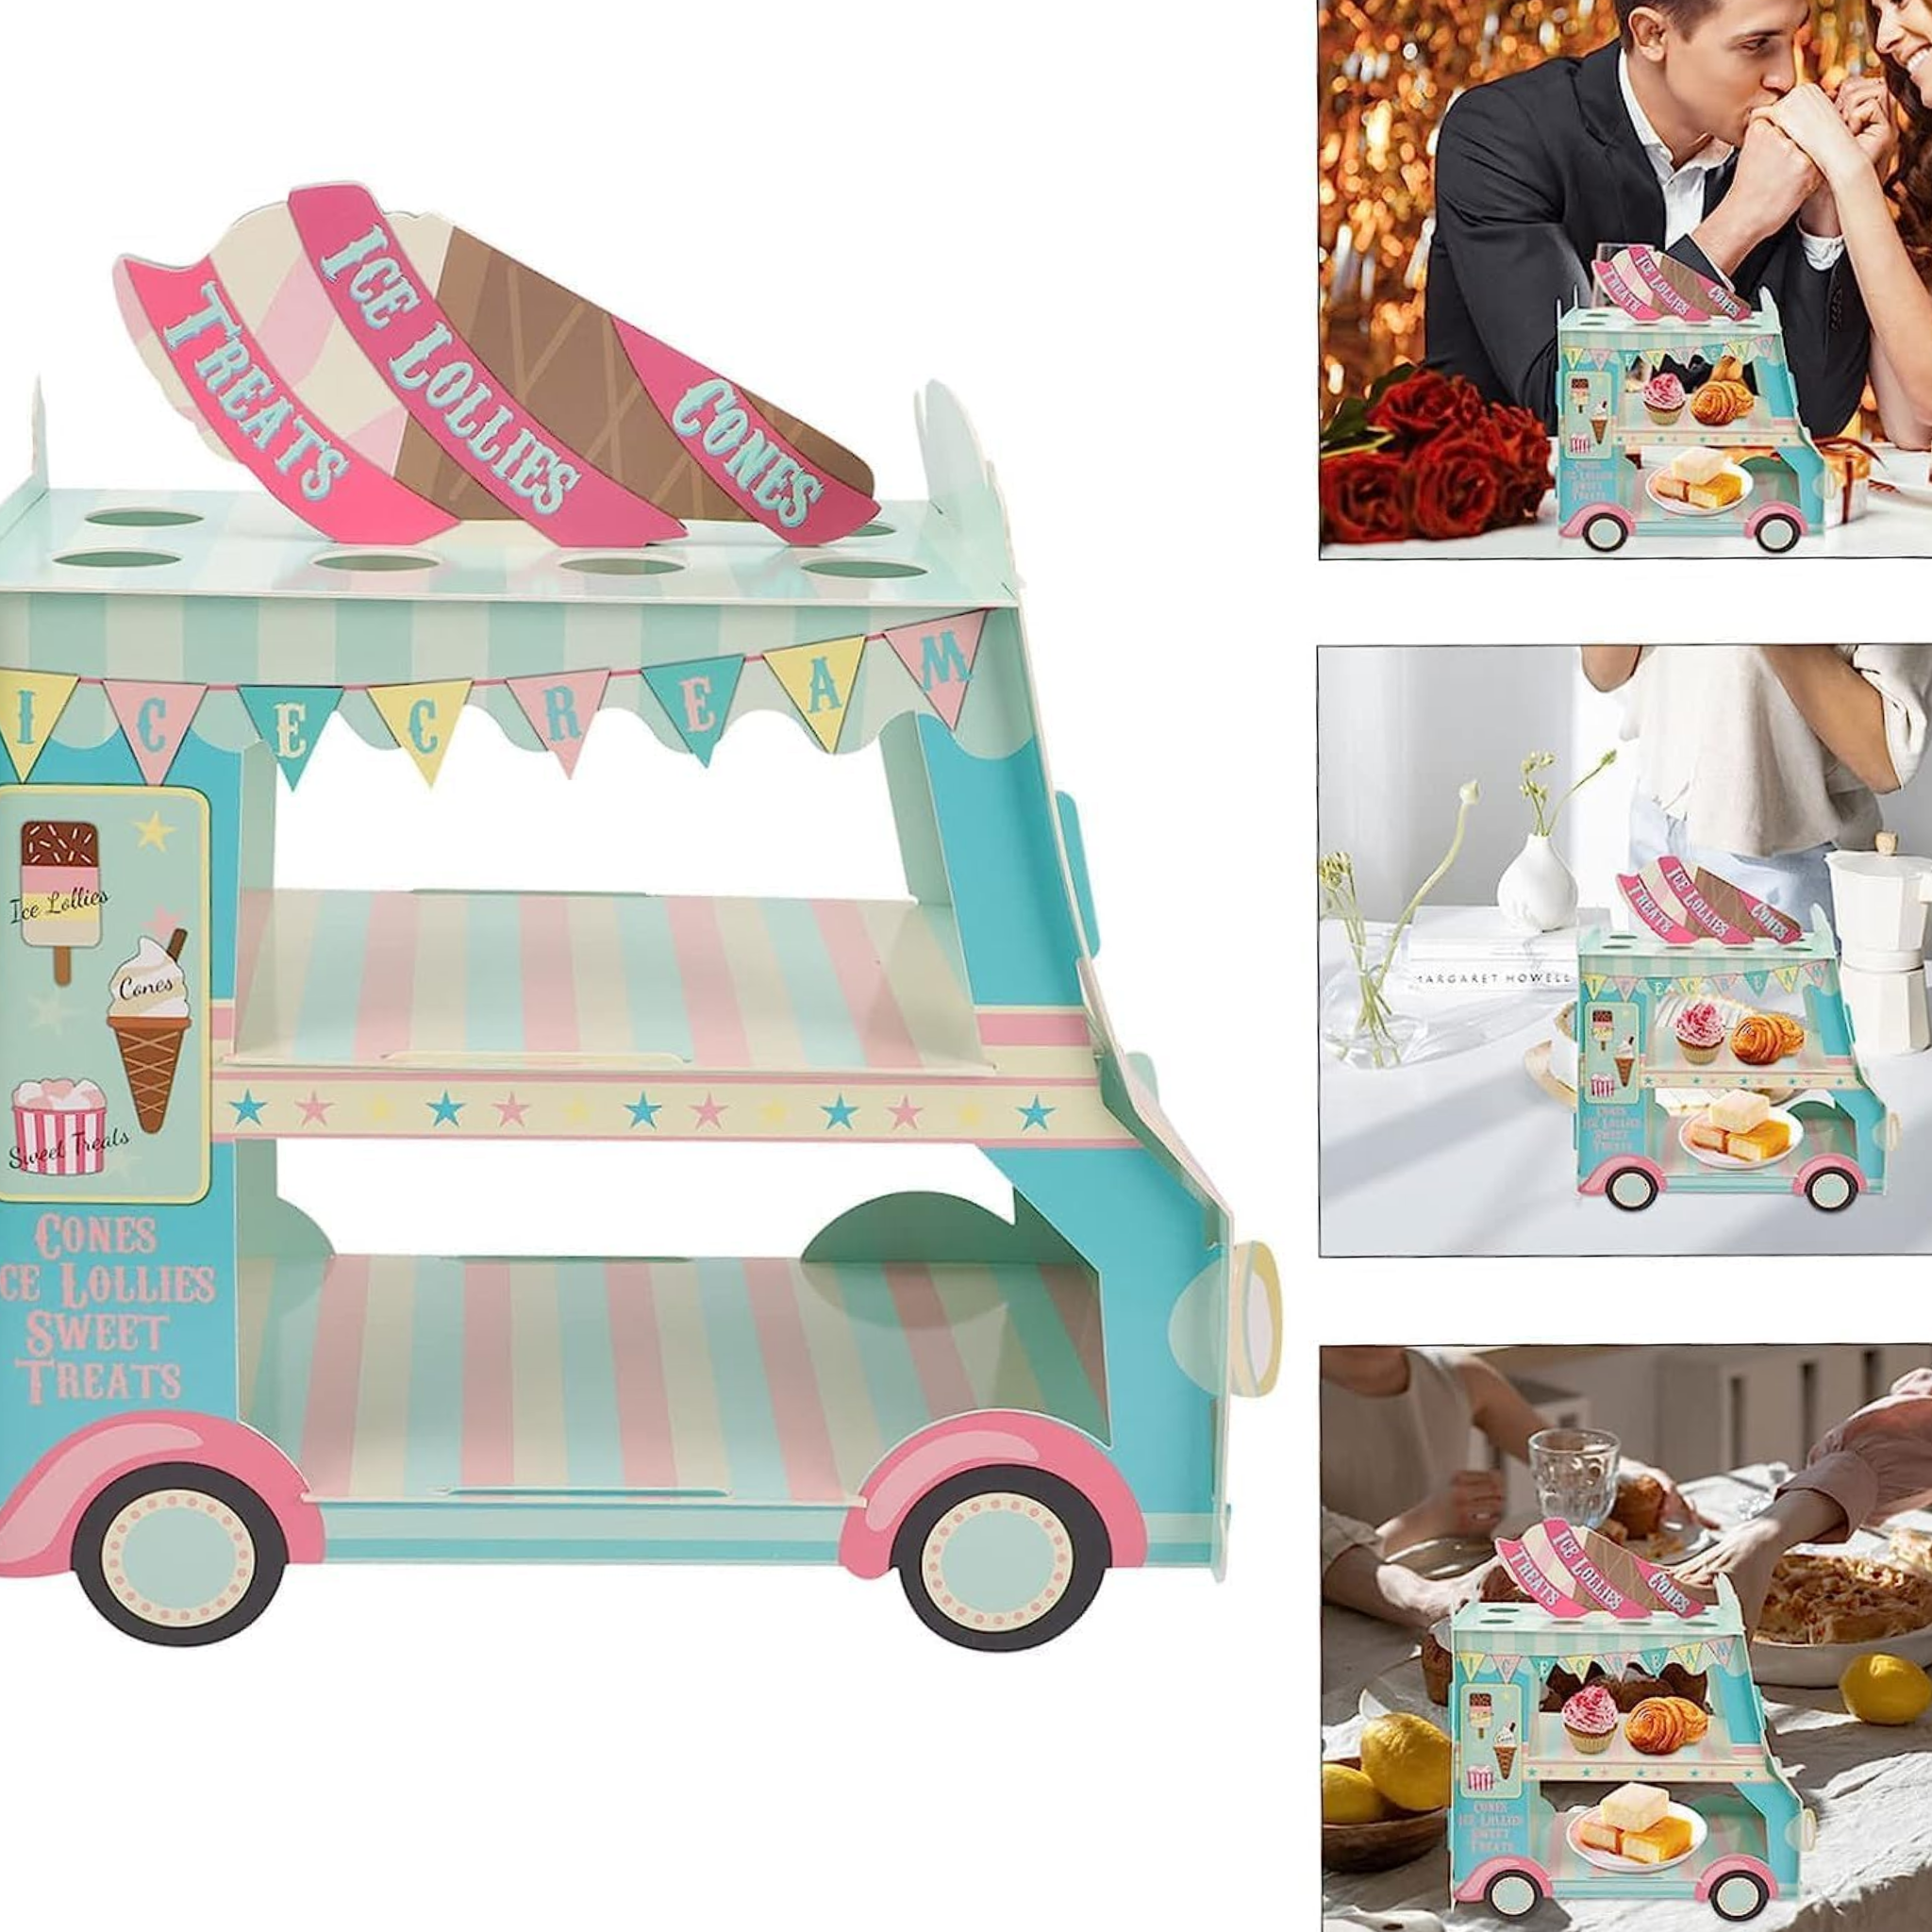 3-Tier Van Cupcake Stand and Serving Trays